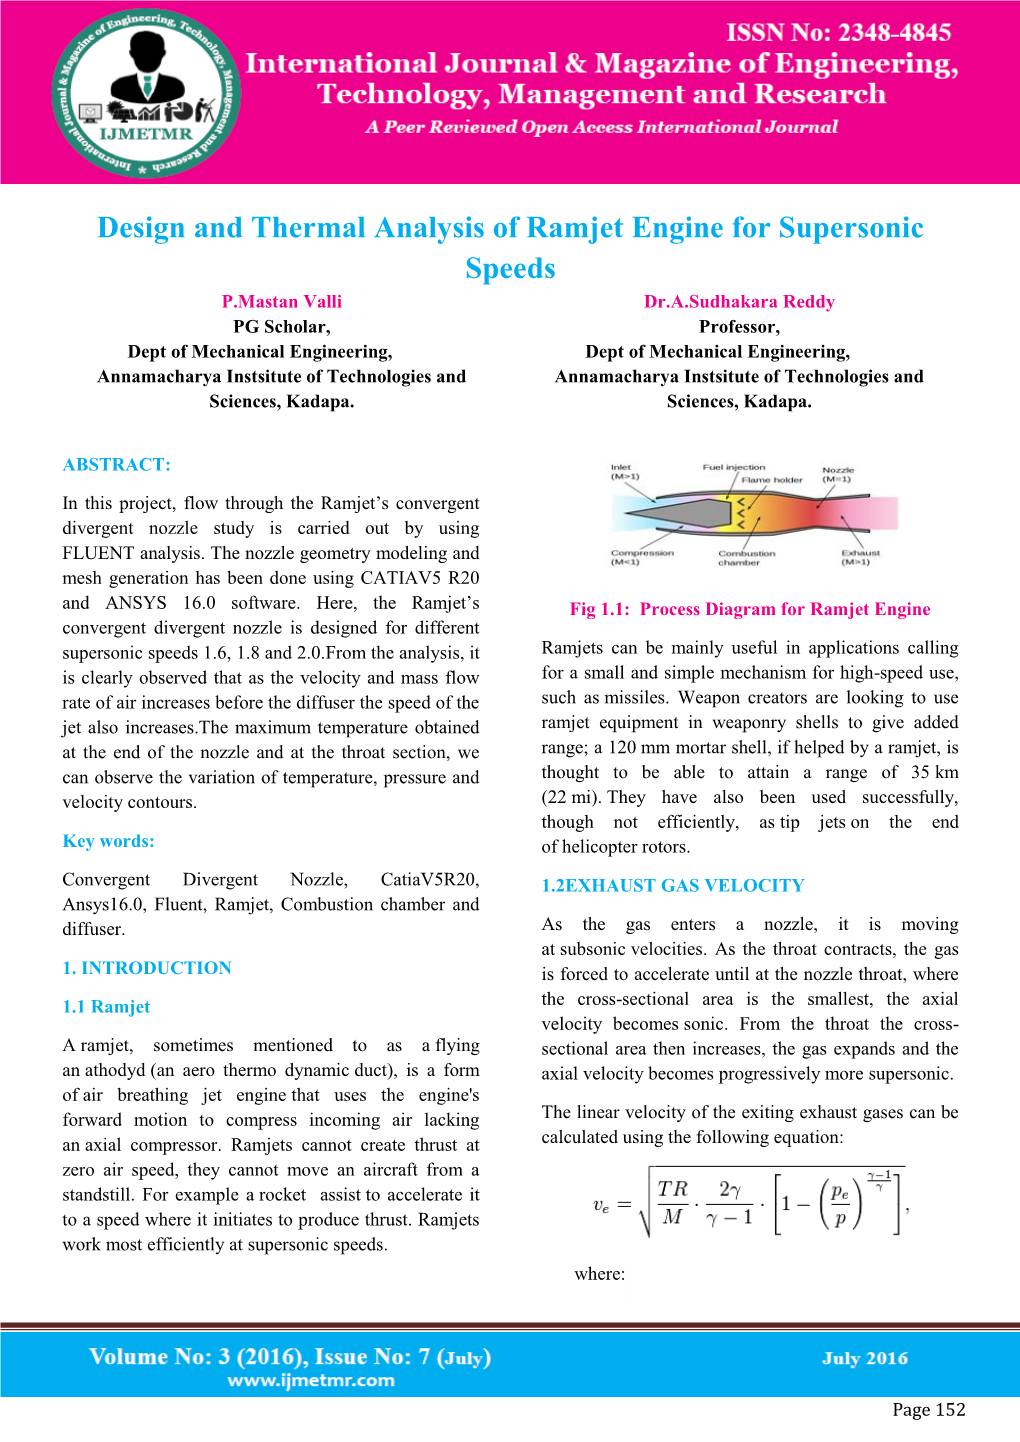 Design and Thermal Analysis of Ramjet Engine For